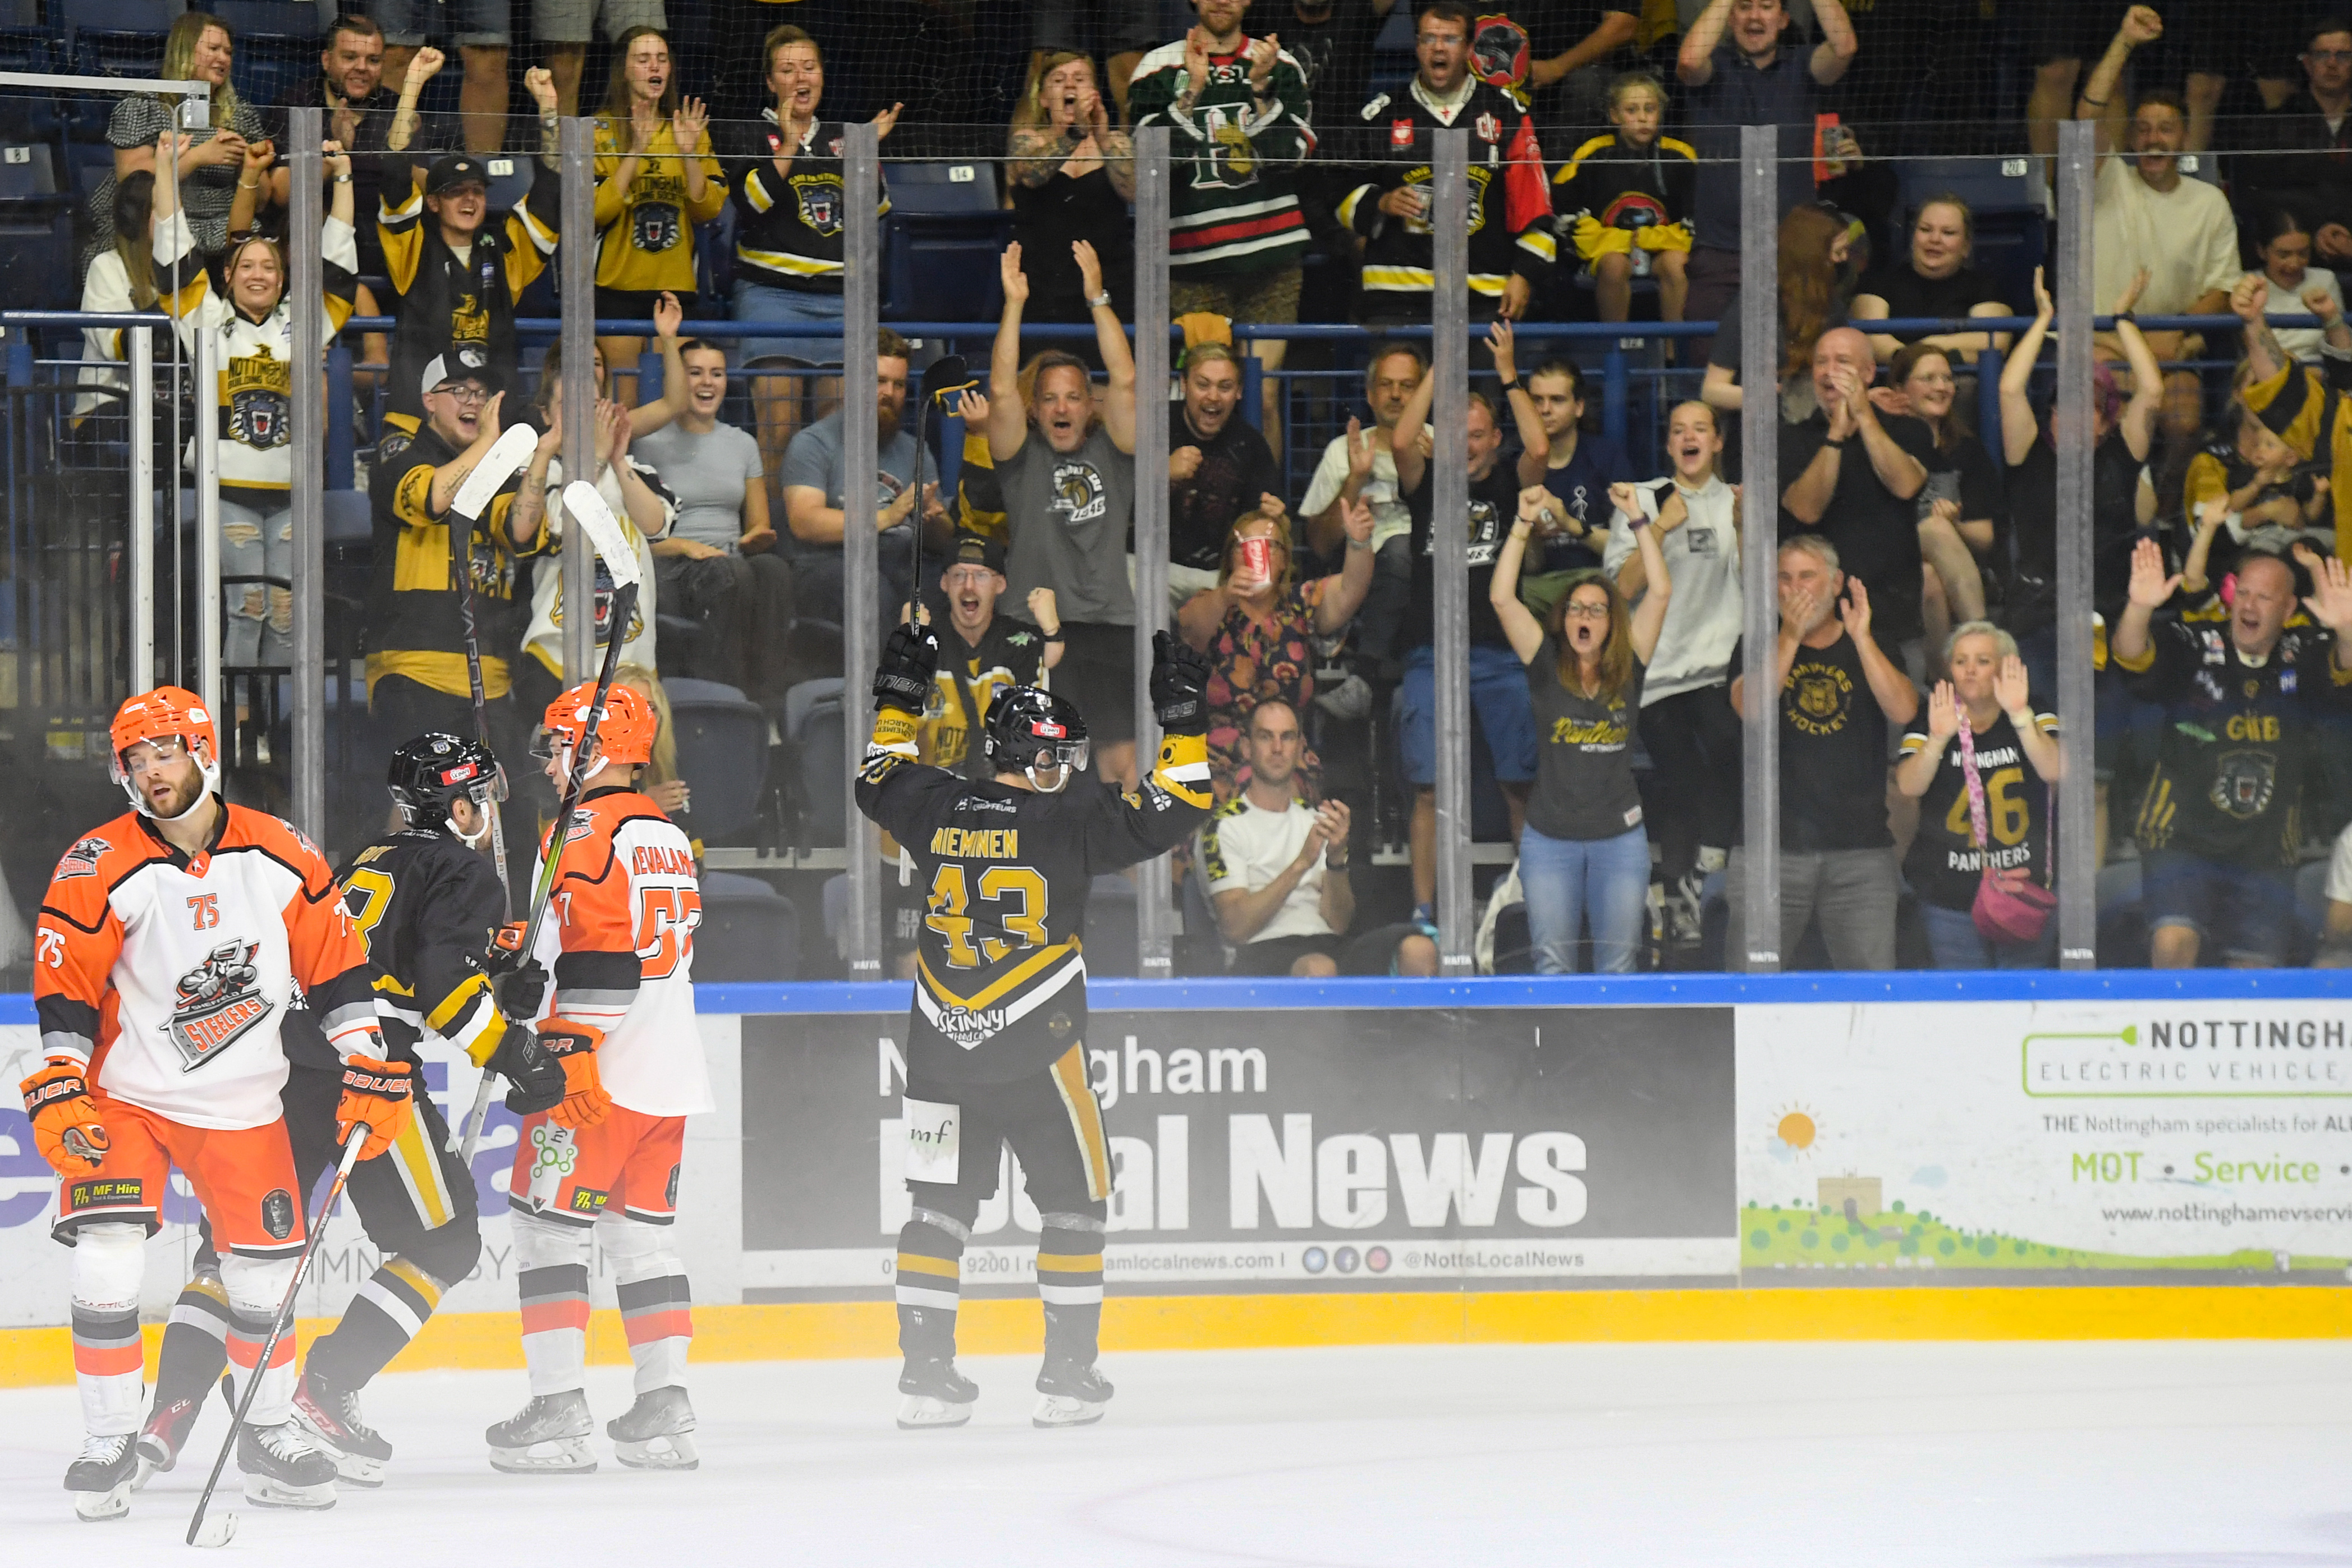 PREVIEW: PANTHERS V STEELERS TONIGHT Top Image